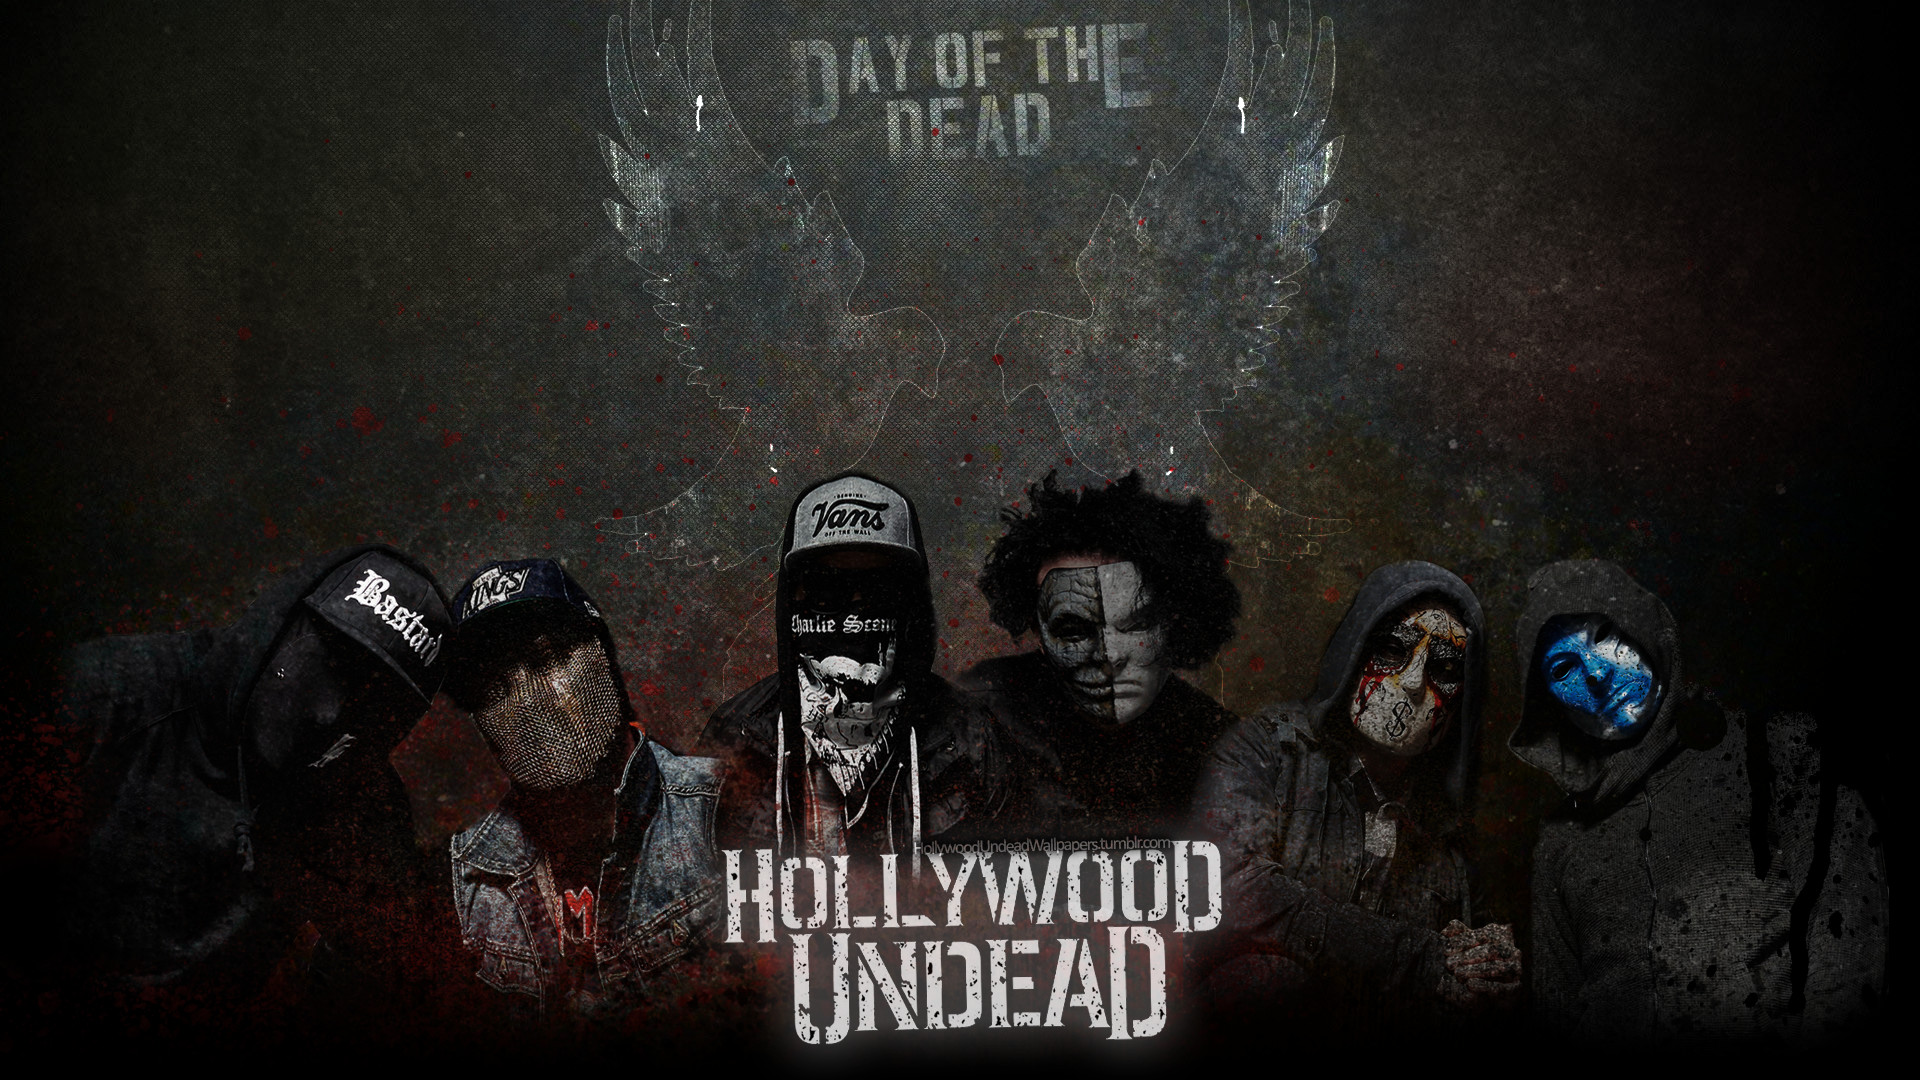 1920x1080 Hollywood Undead - Day of the Dead WP (NEW MASKS)! by emirulug